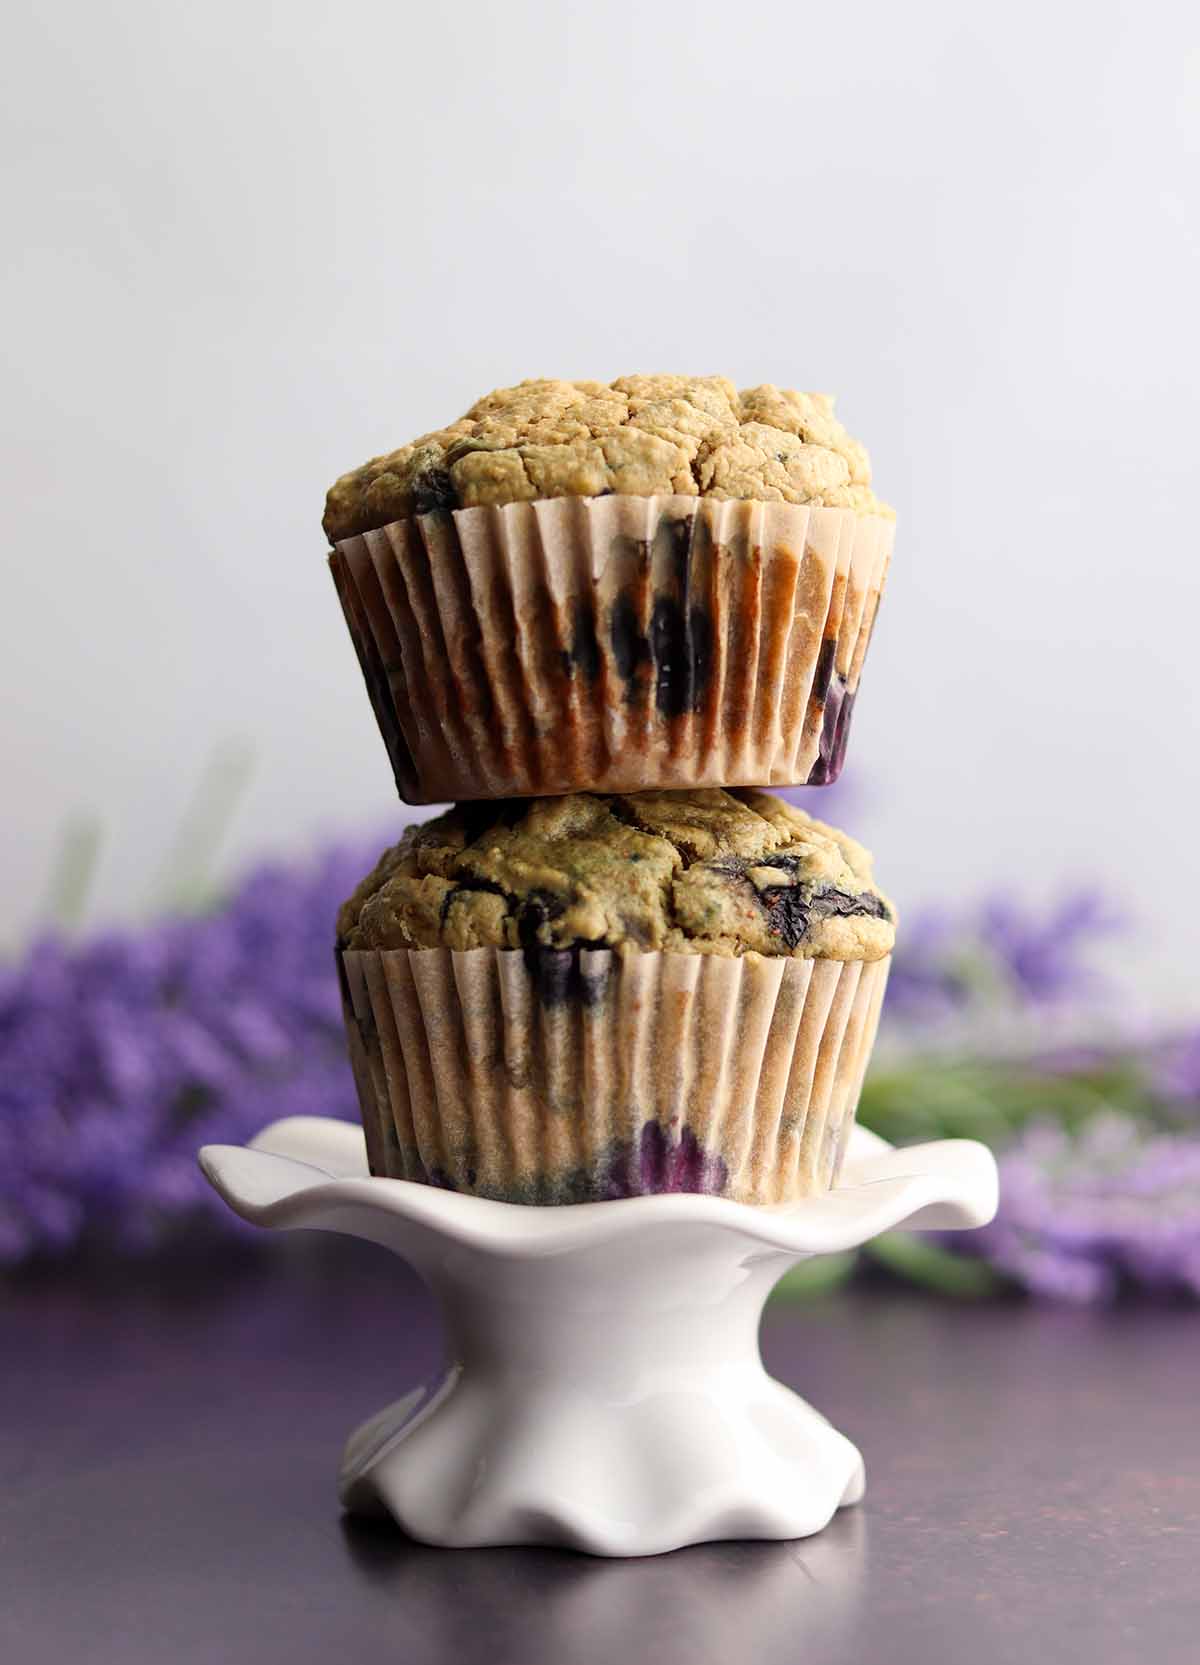 Two blueberry muffins stacked on top of each other on a cup cake pedestal with two bunches of lavender in background 